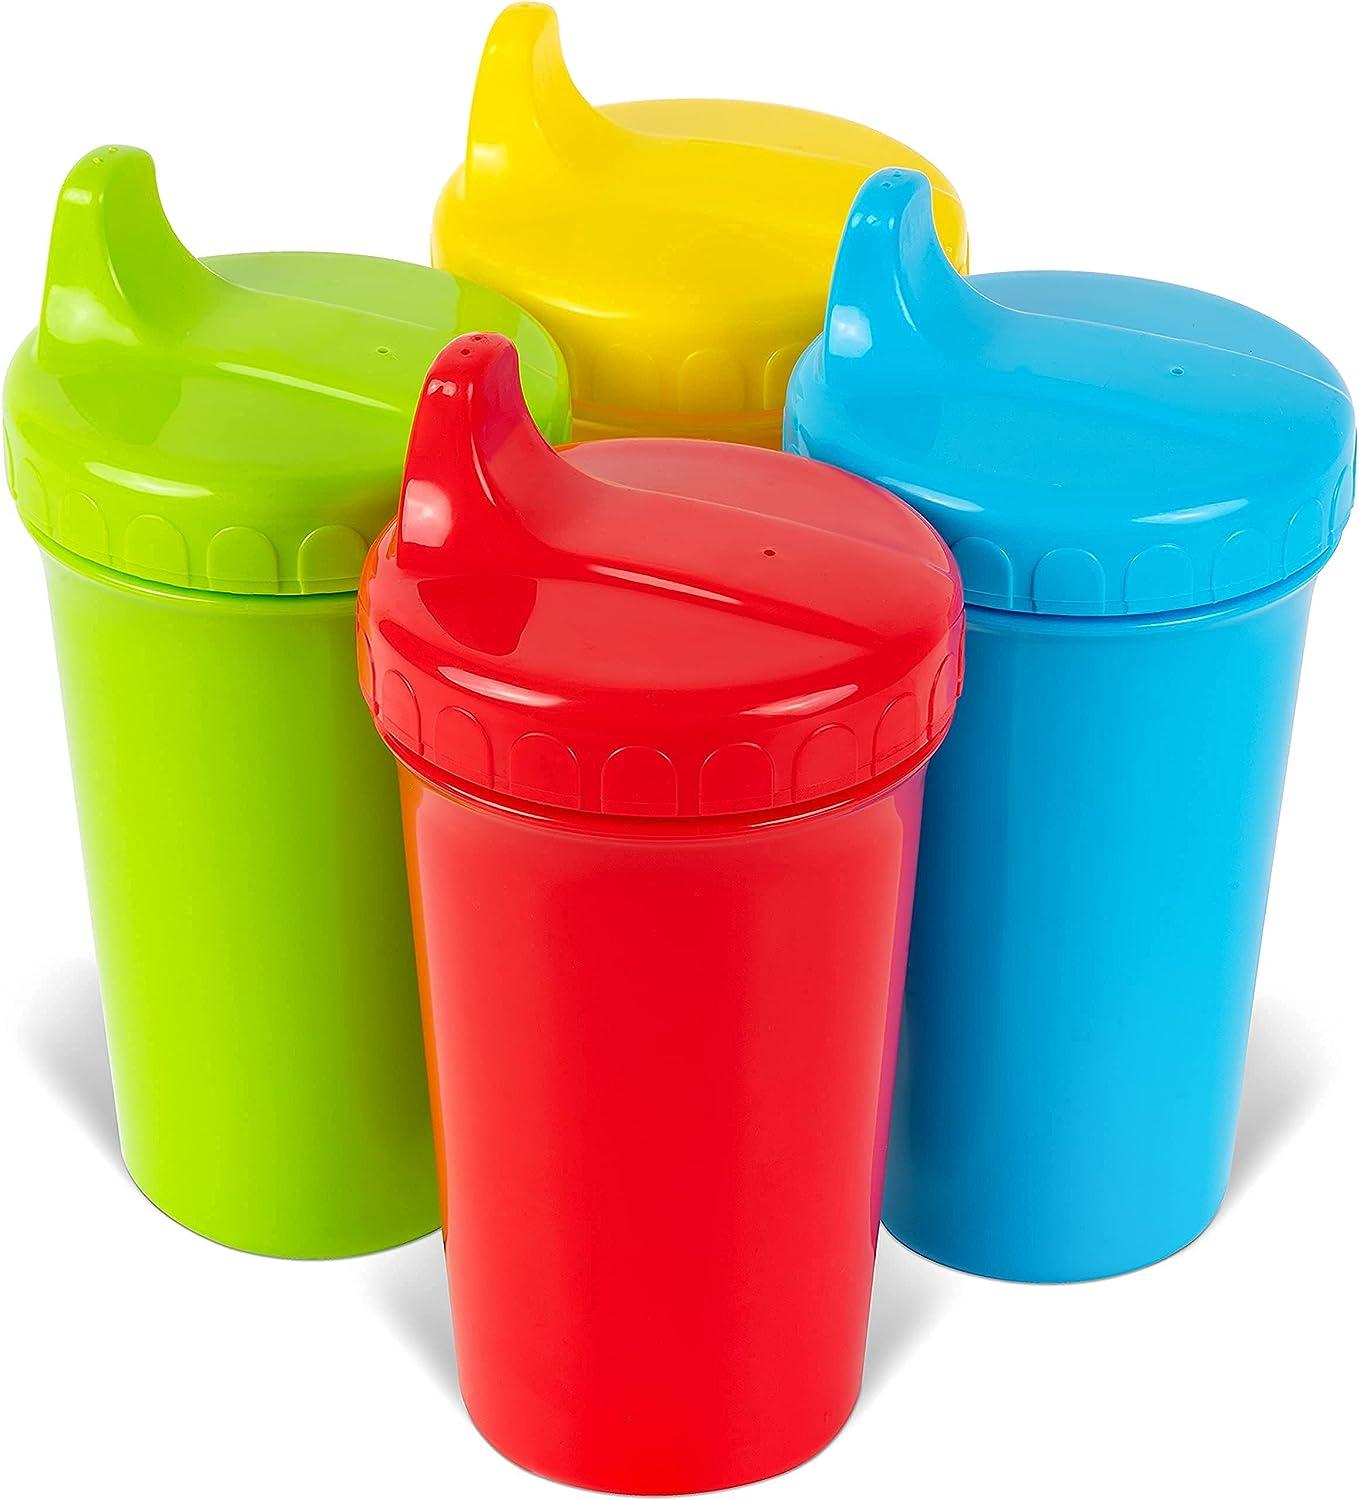 LYASILGC 8oz Toddler Cups - 4 Pack Silicone Sippy Cup Dishwasher